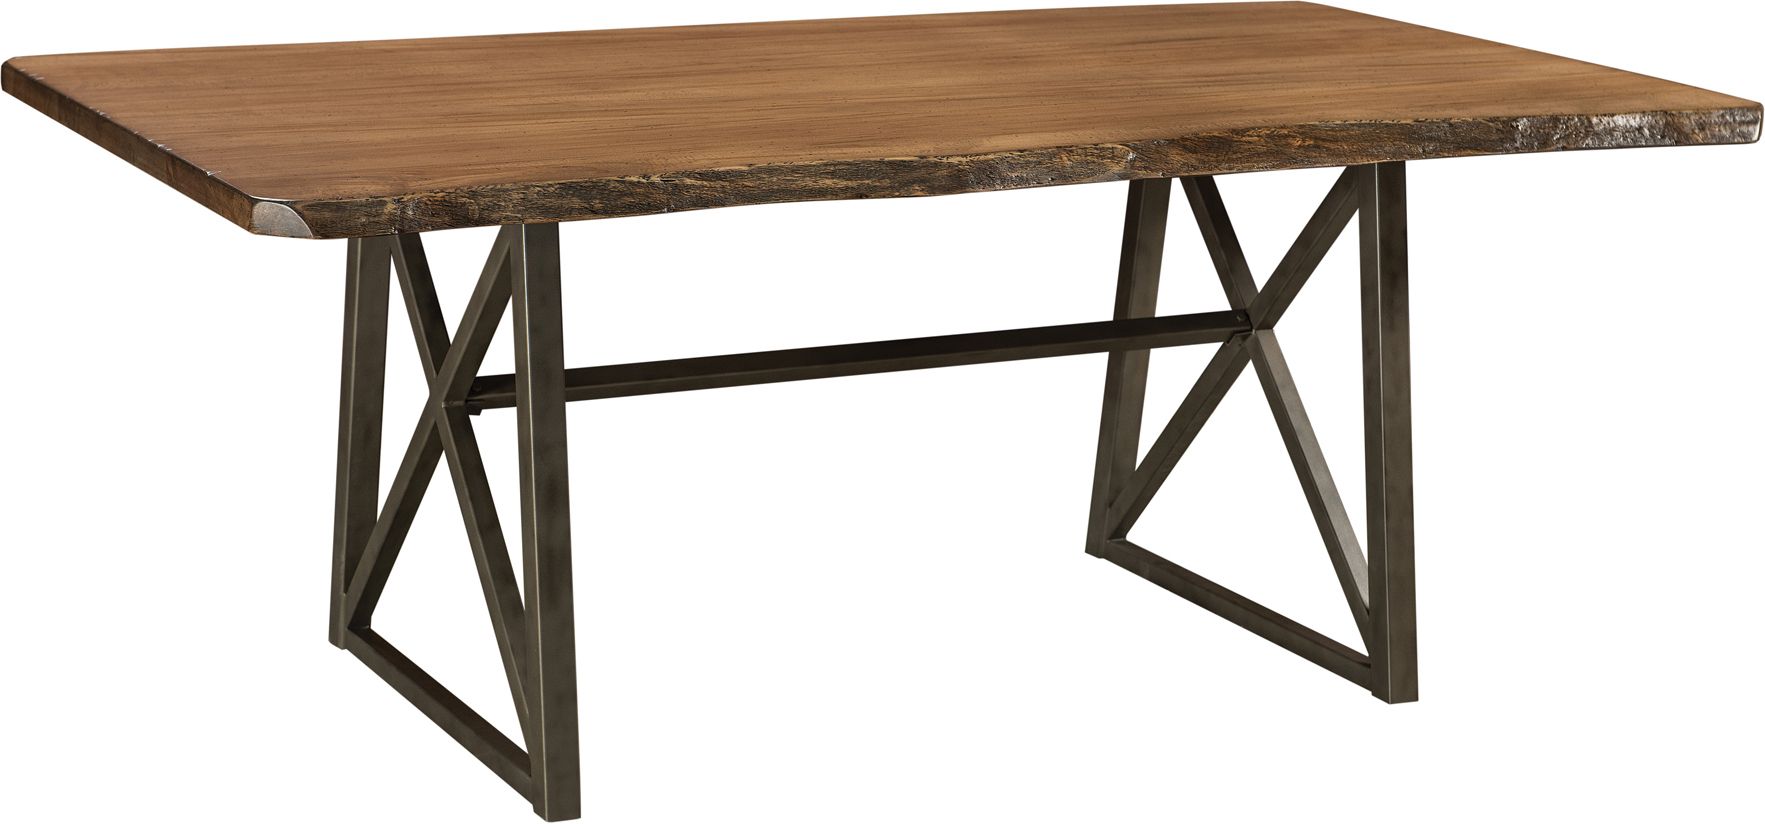 Amish Trestle Dining Table (View 12 of 20)